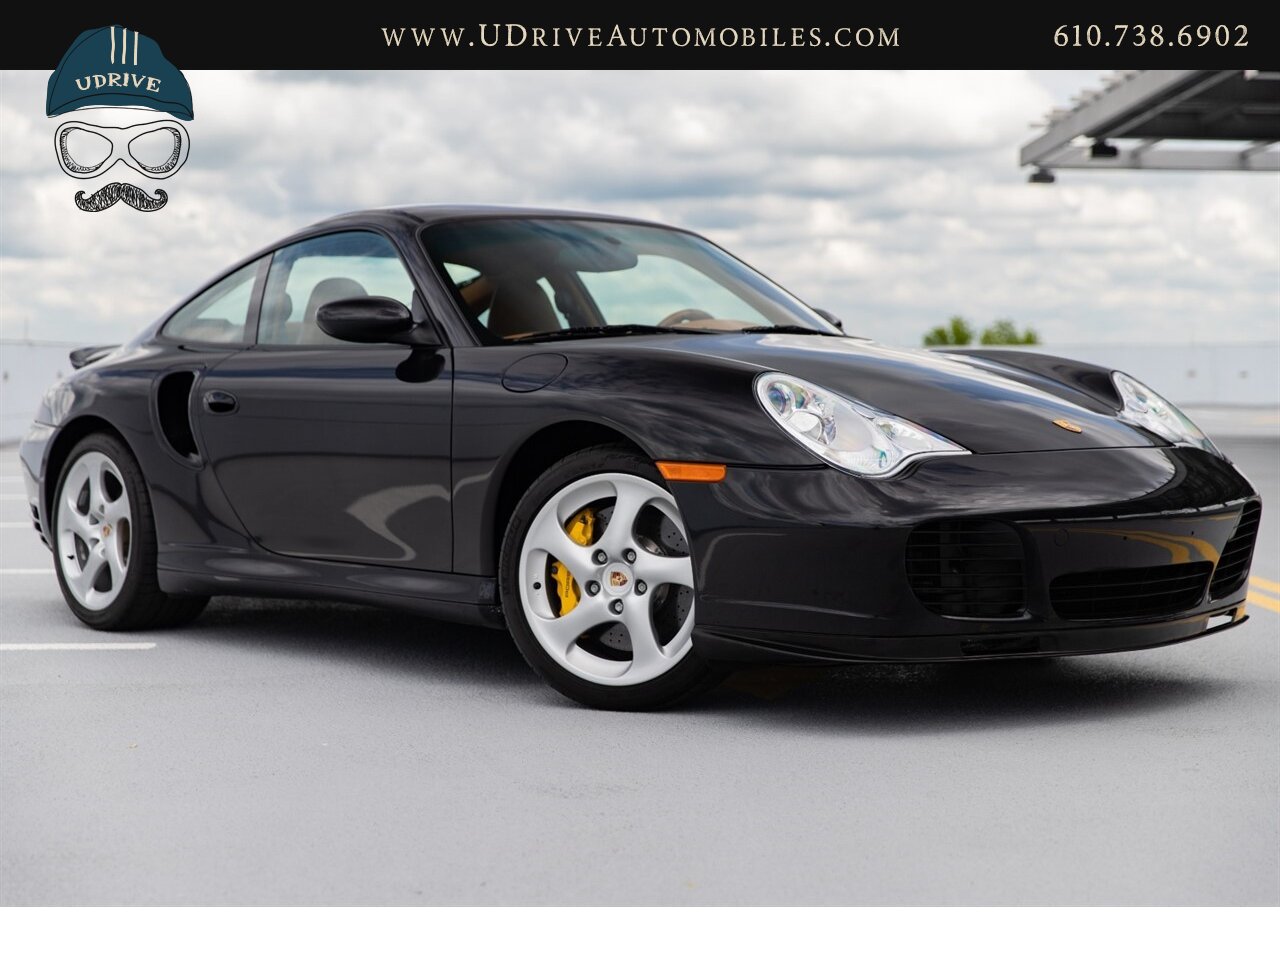 2005 Porsche 911 Turbo S 6 Speed 14k Miles Sport Sts Painted Backs  Natural Brown Lthr $144,070 MSRP - Photo 4 - West Chester, PA 19382